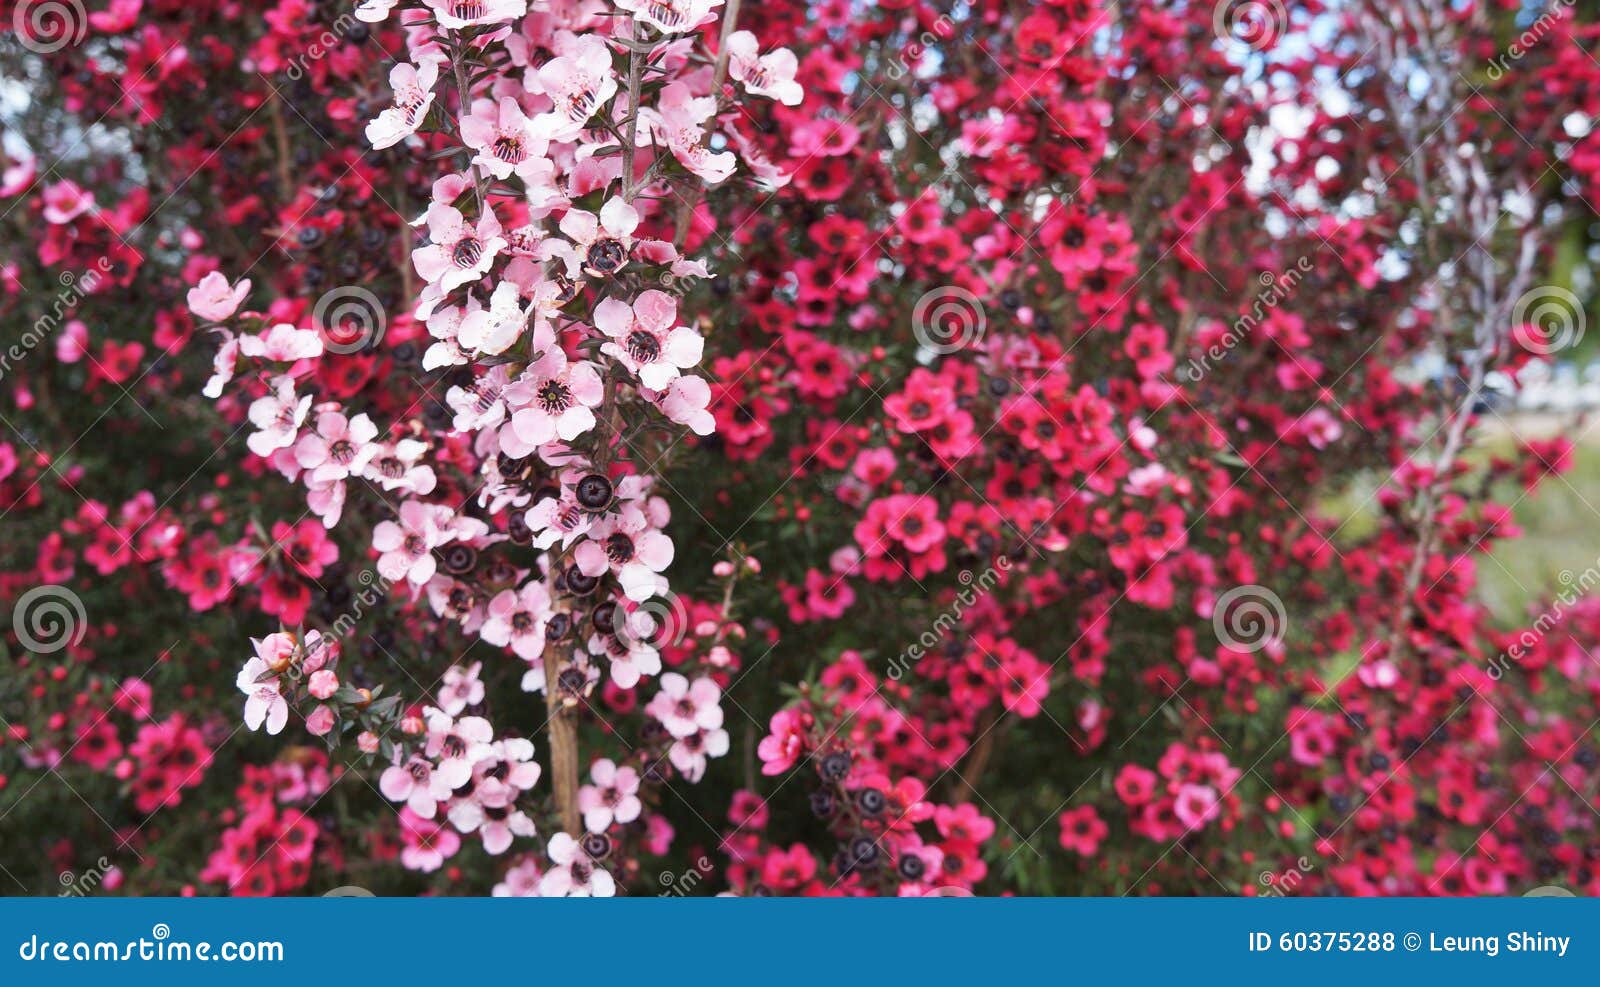 pink-manuka-flowers-grown-new-zealand-flower-also-known-as-tea-tree-their-come-white-varies-shades-60375288.jpg